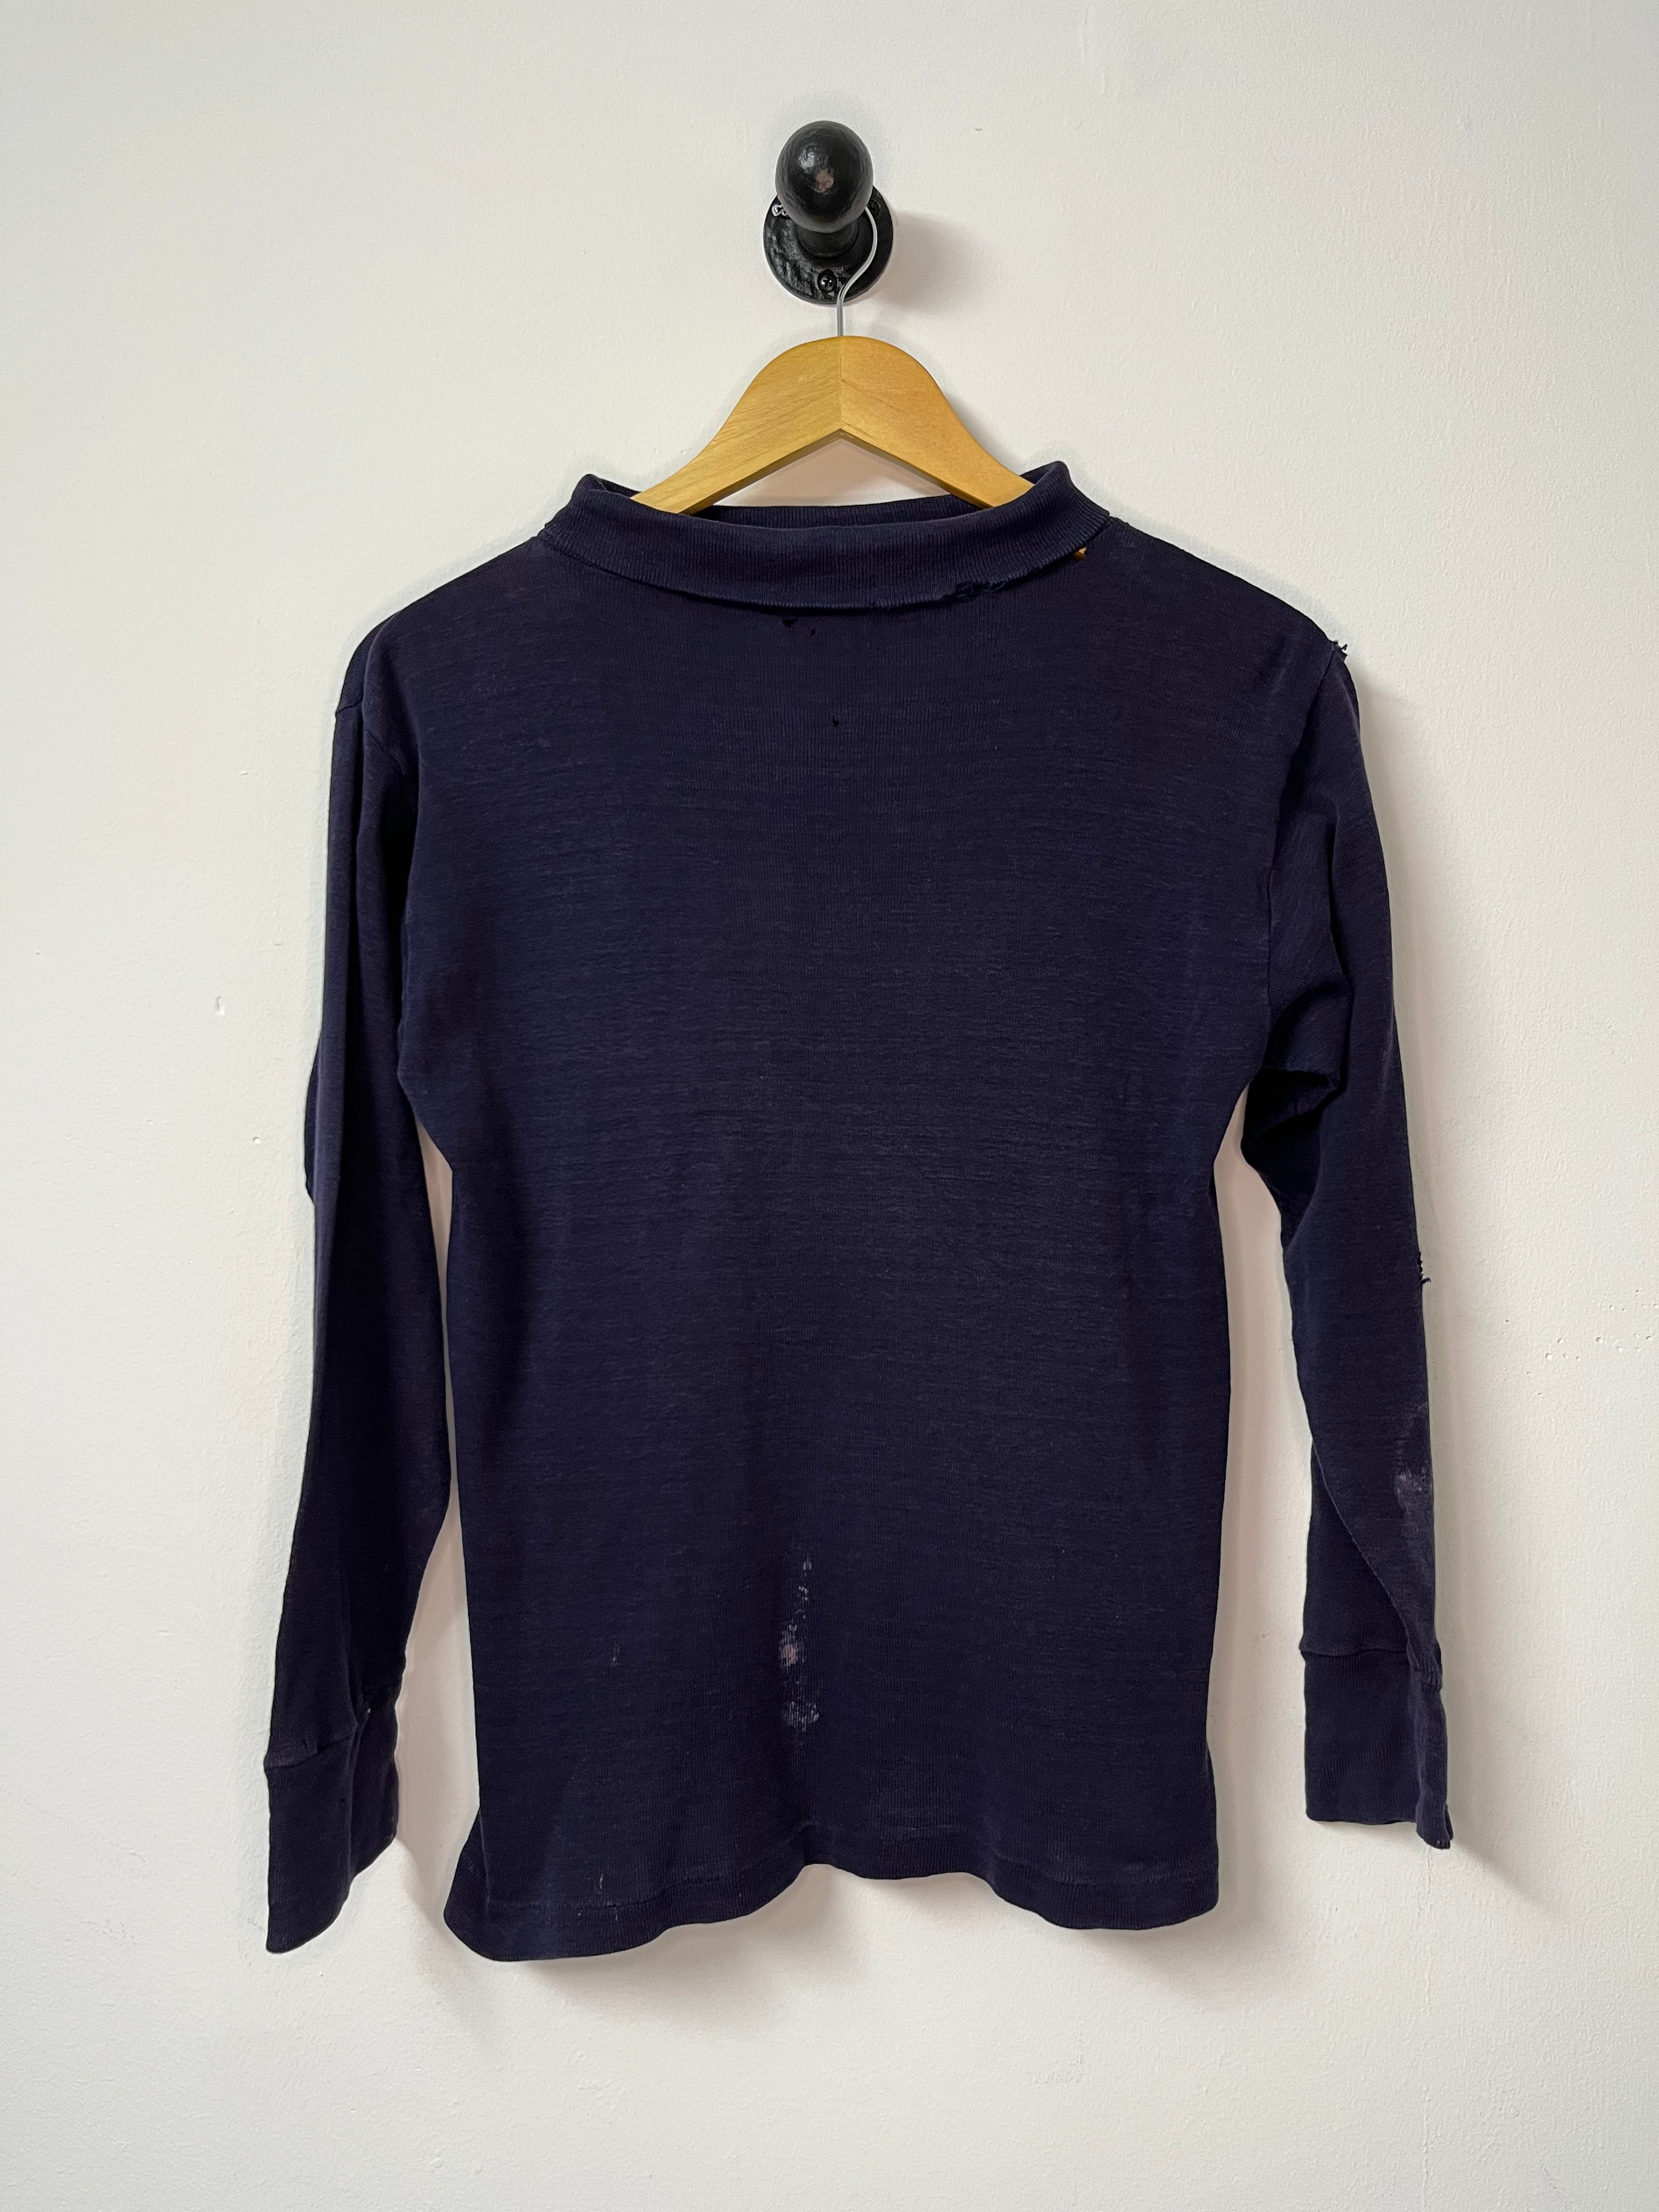 60s Distressed Long Sleeve Turtleneck T-Shirt- Washed Navy Blue and Light Distressing- S/M